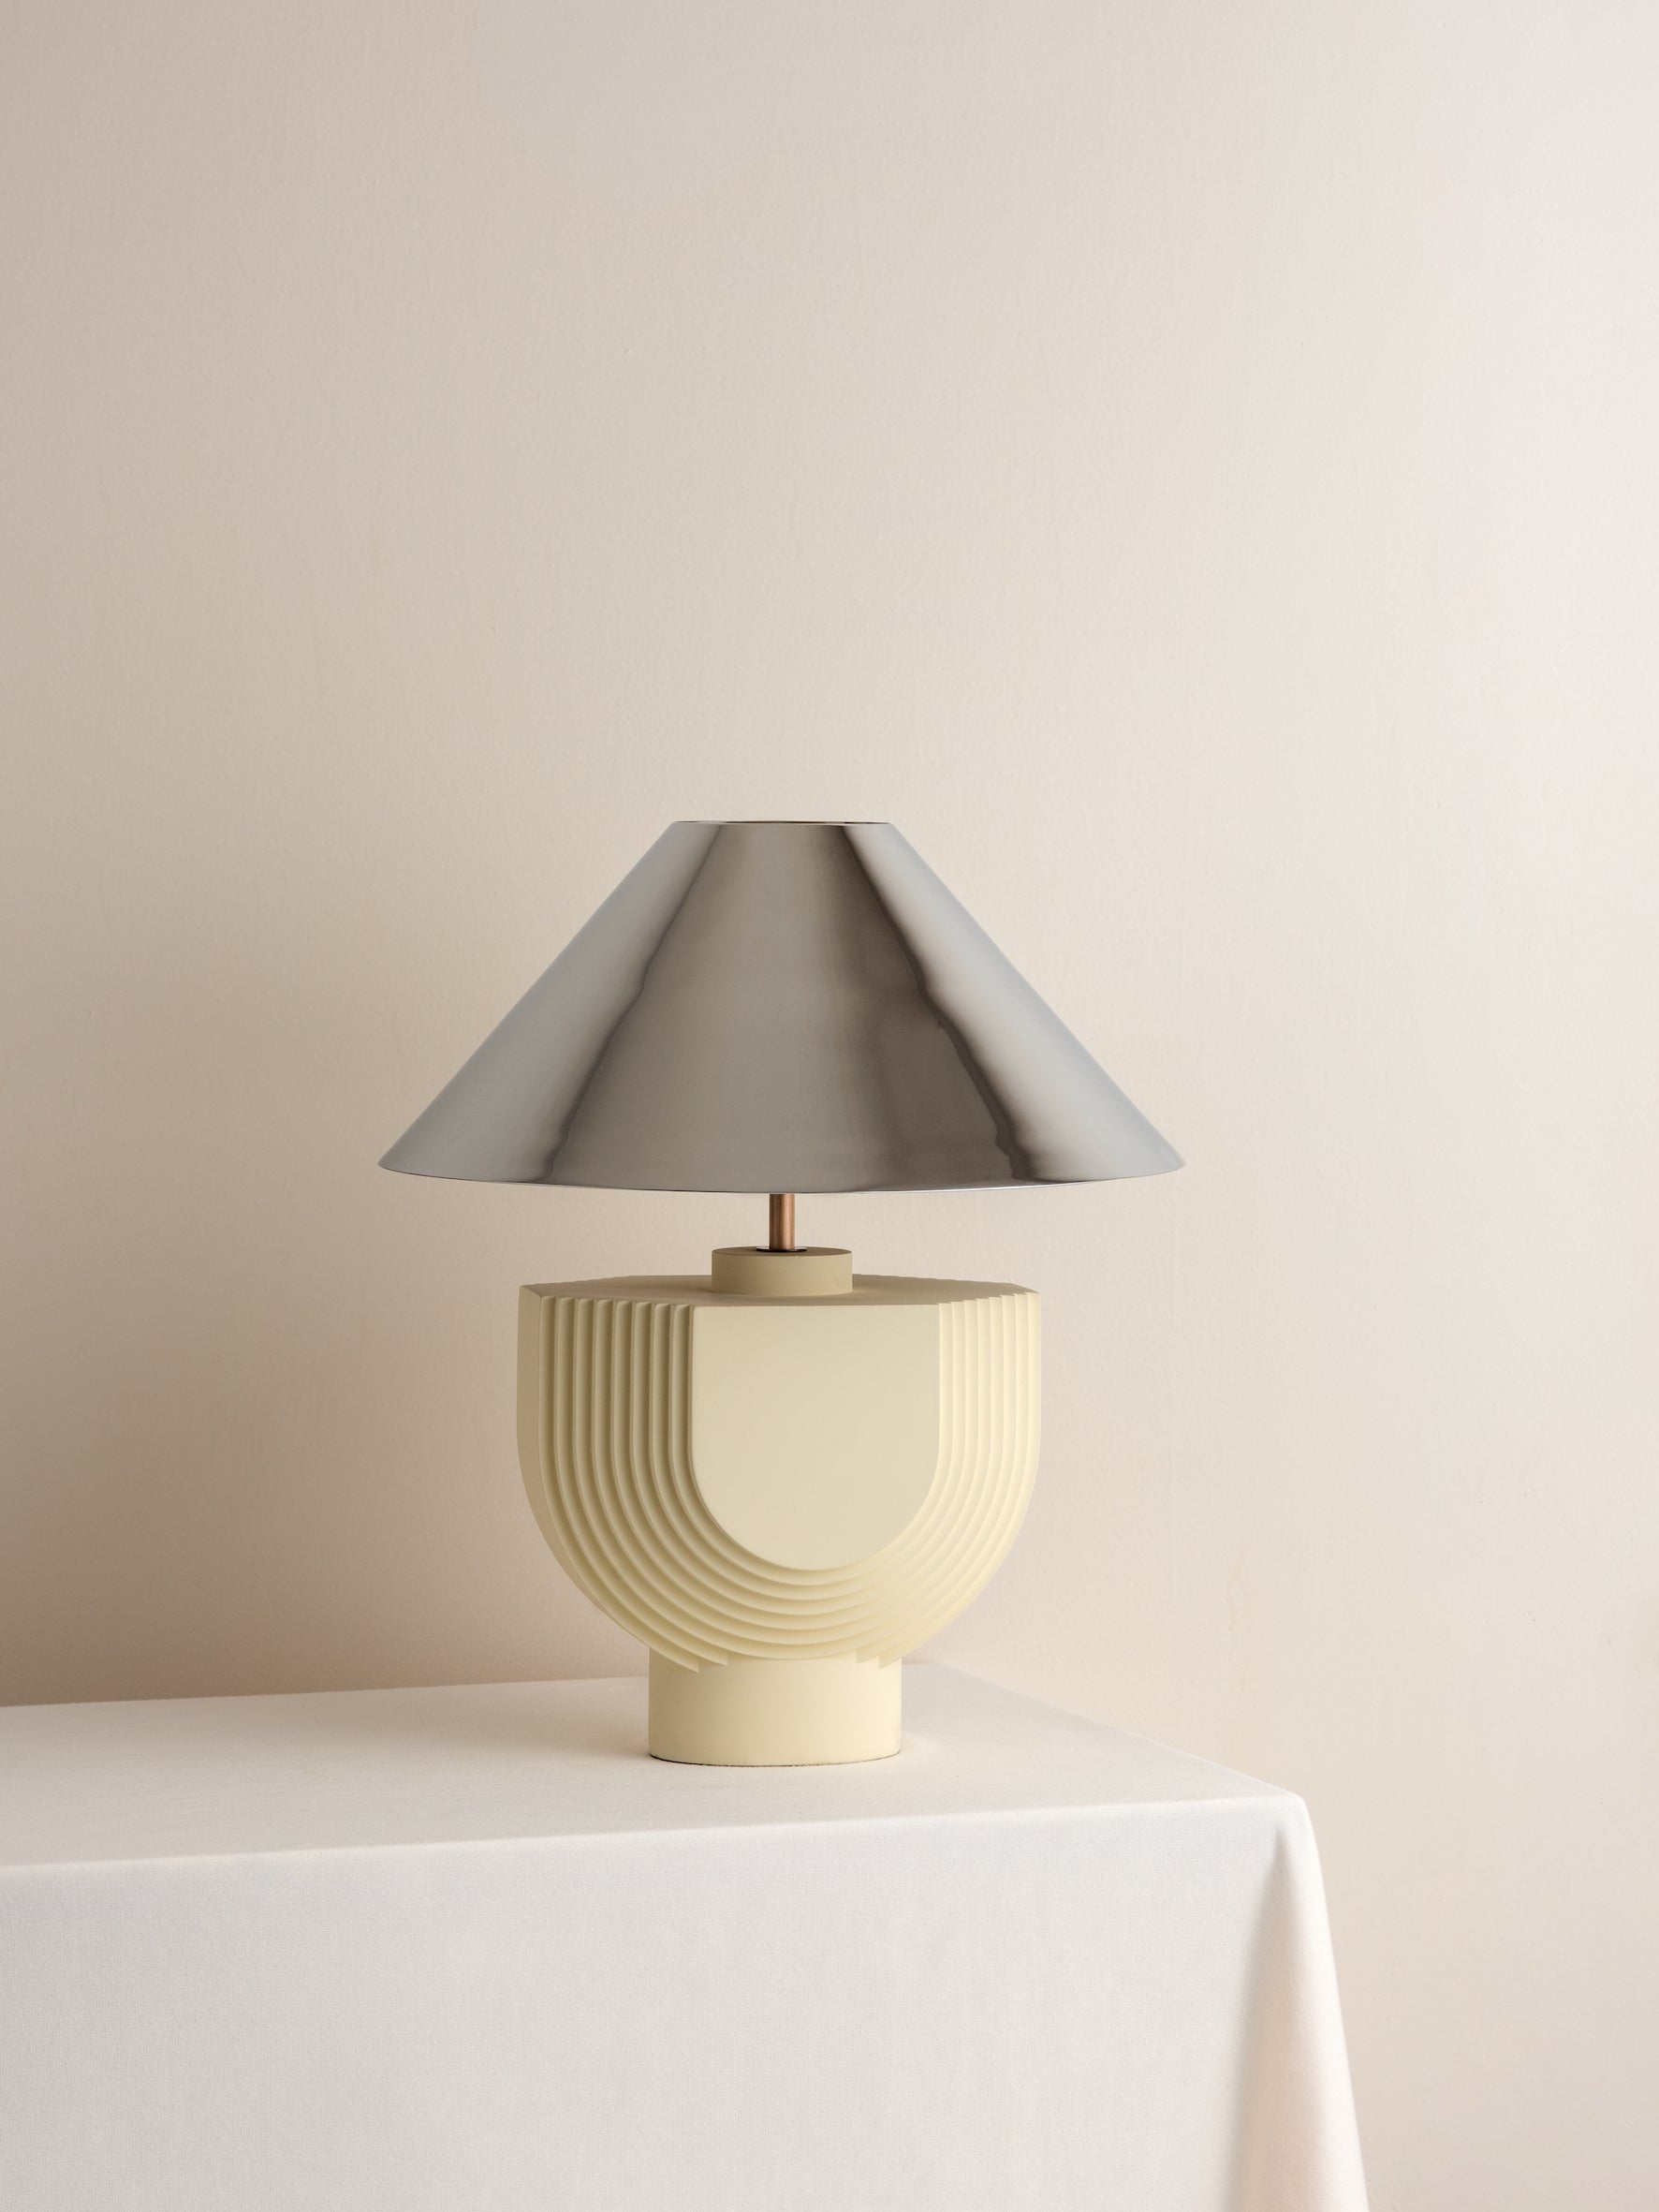 Editions concrete lamp with + chrome shade | Table Lamp | Lights & Lamps | UK | Modern Affordable Designer Lighting